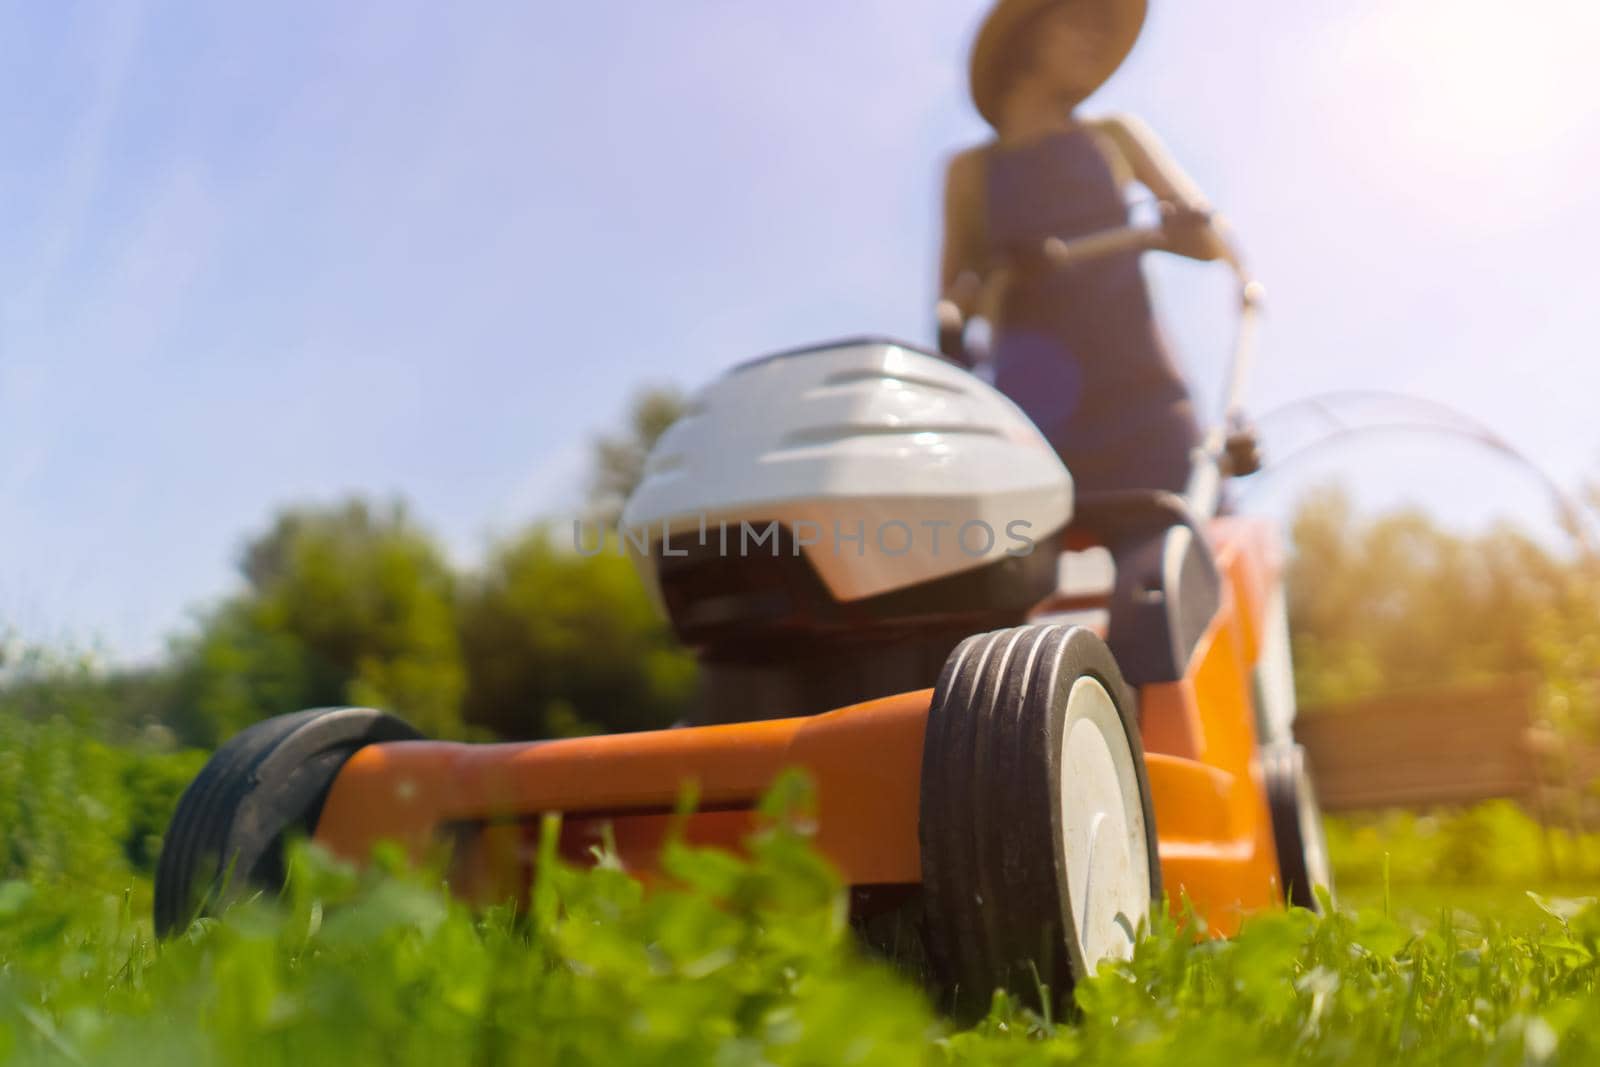 A young girl is mowing a lawn in the backyard with an orange lawn mower. A woman gardener is trimming grass with the grass cutter, bottom view.A lawnmower is cutting a lawn on a summer sunny day.